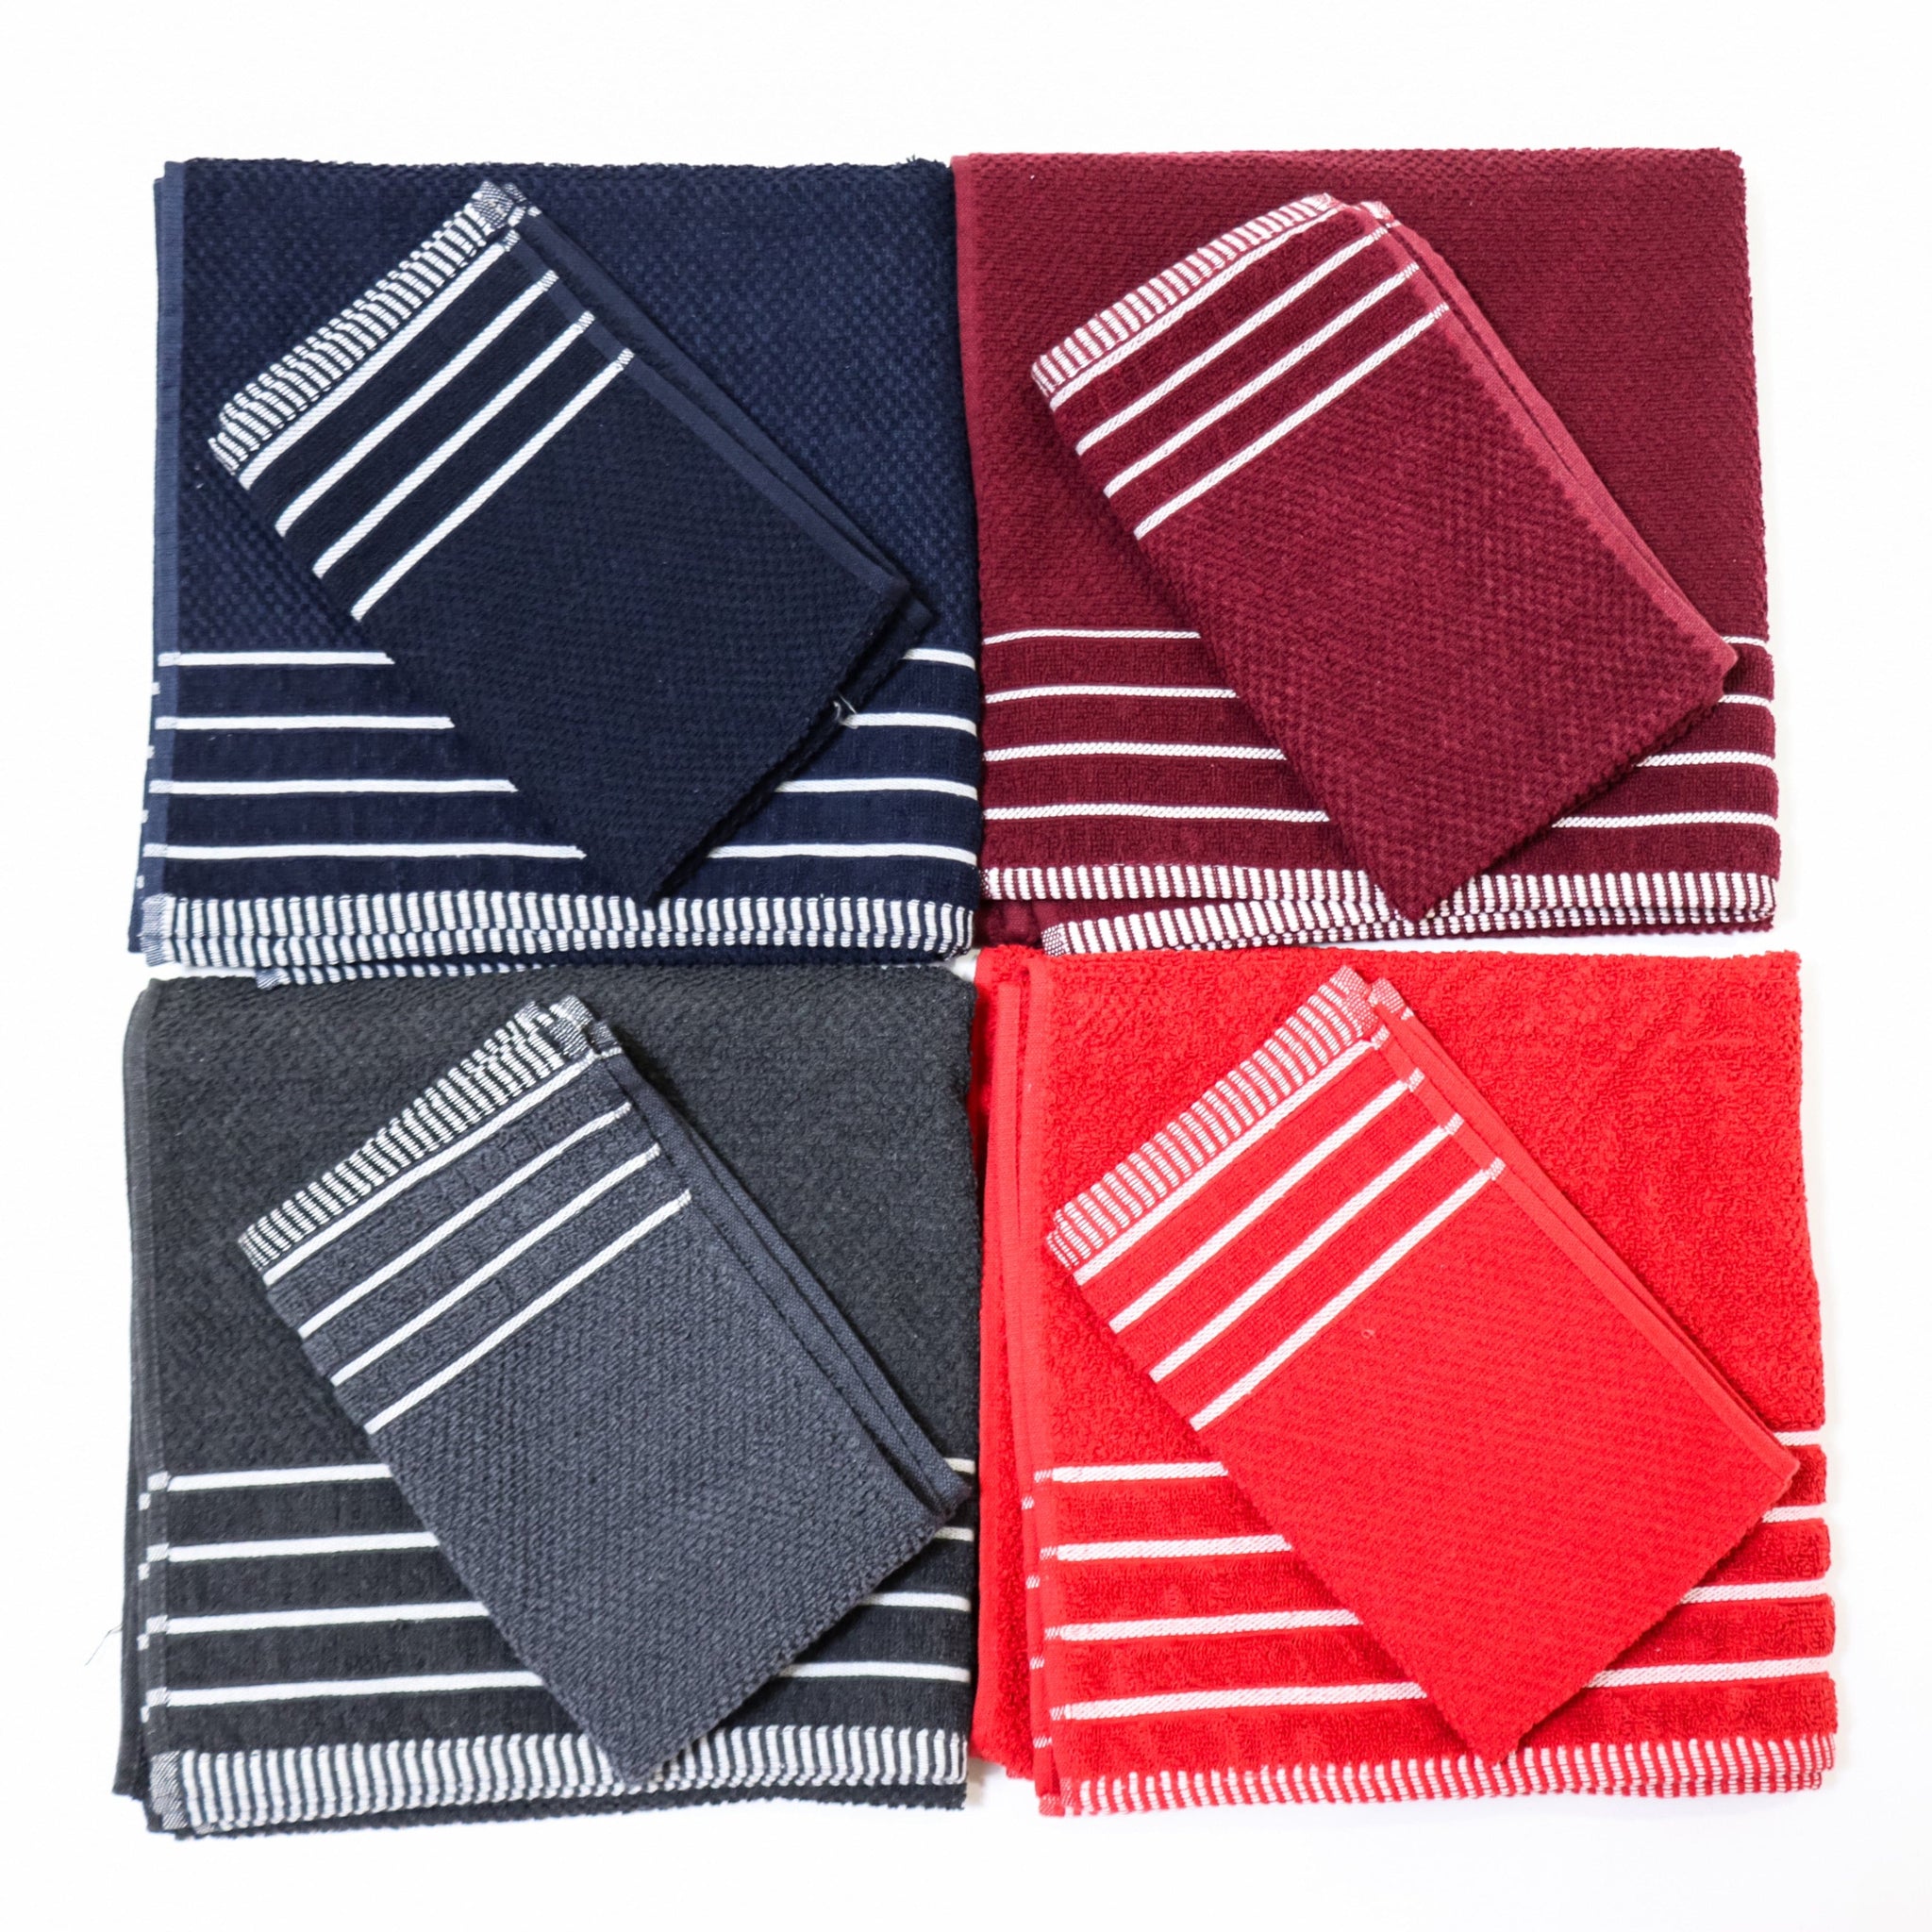 Navy Blue 4 Piece 100% Cotton Bath and Hand Towel Set -By RANJ